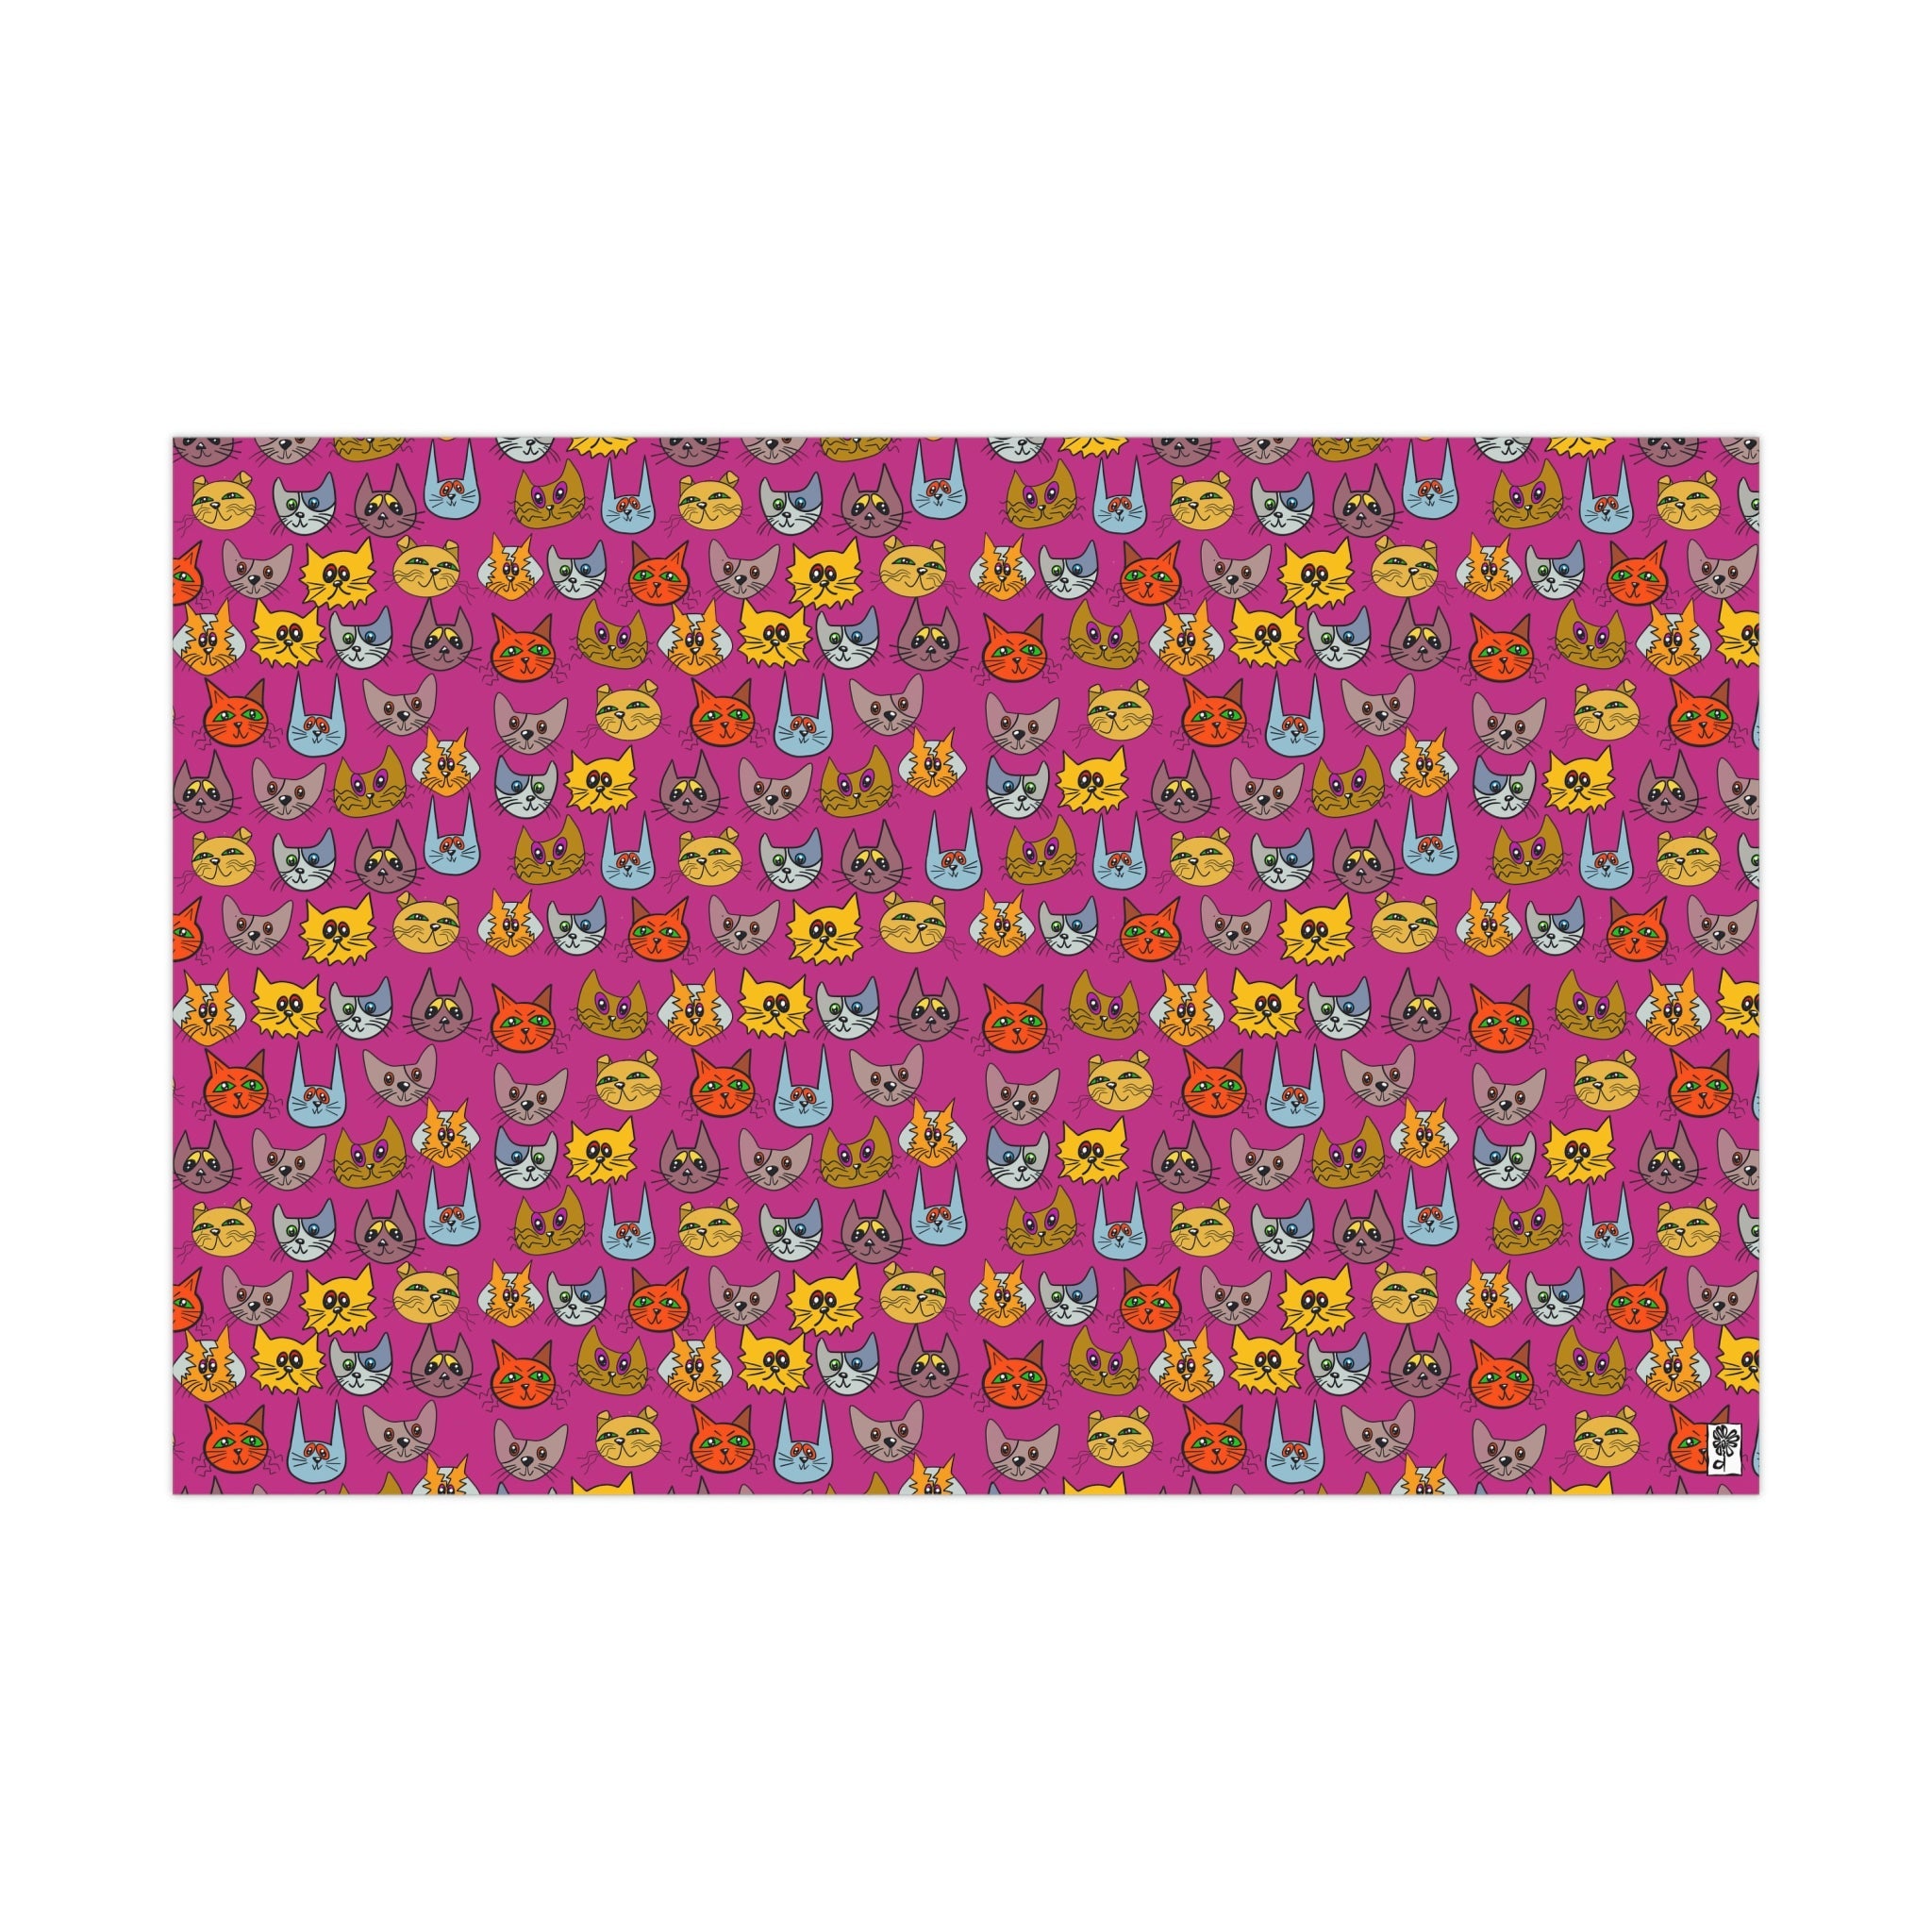 Pink flower Wrapping Paper by KPT Art & design